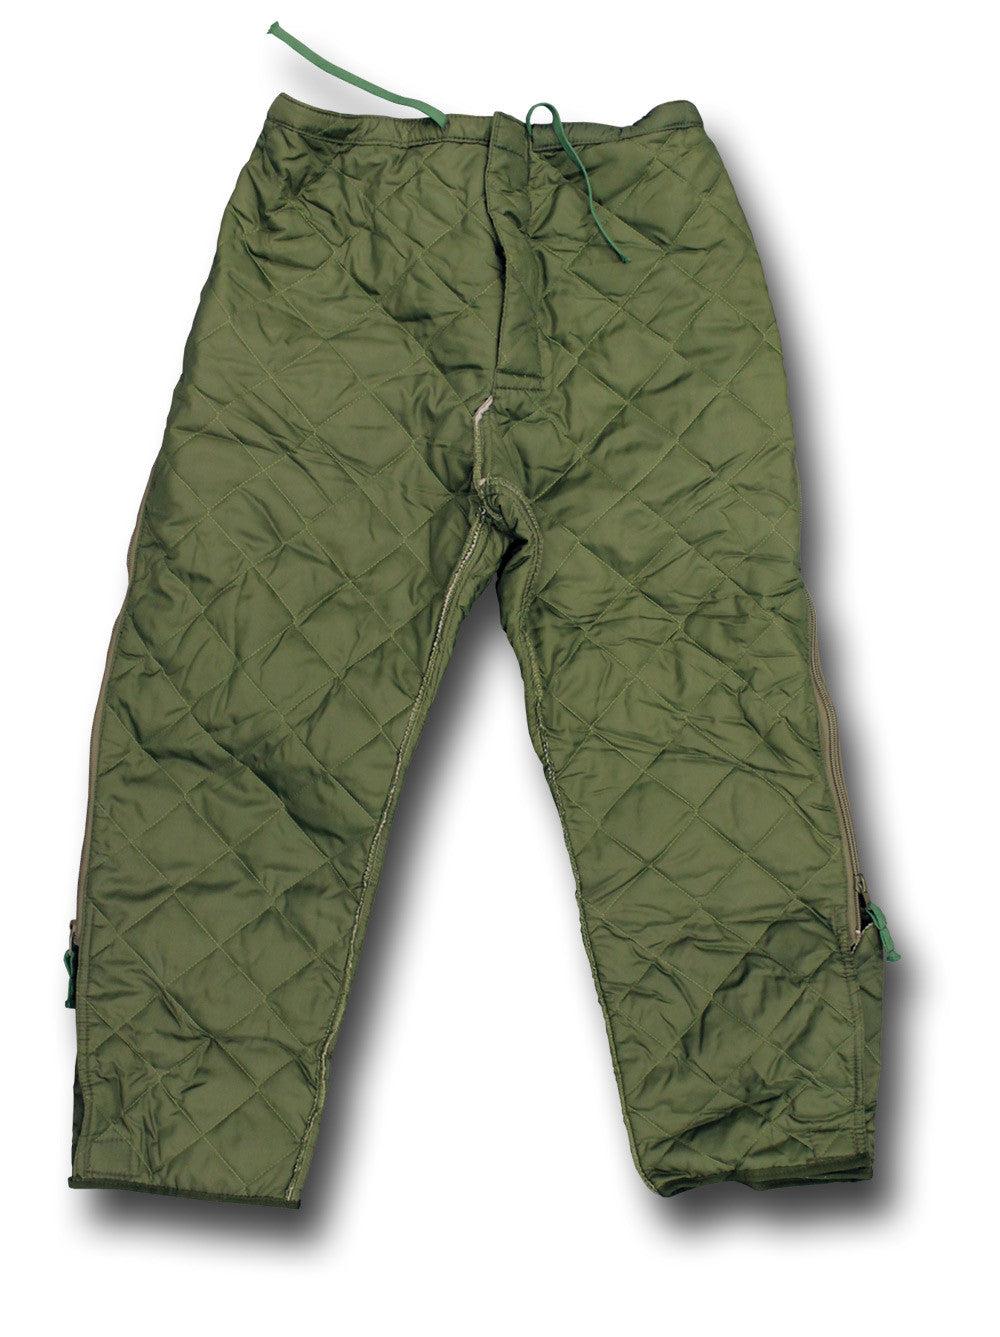 LINER FOR COLD WEATHER TROUSERS